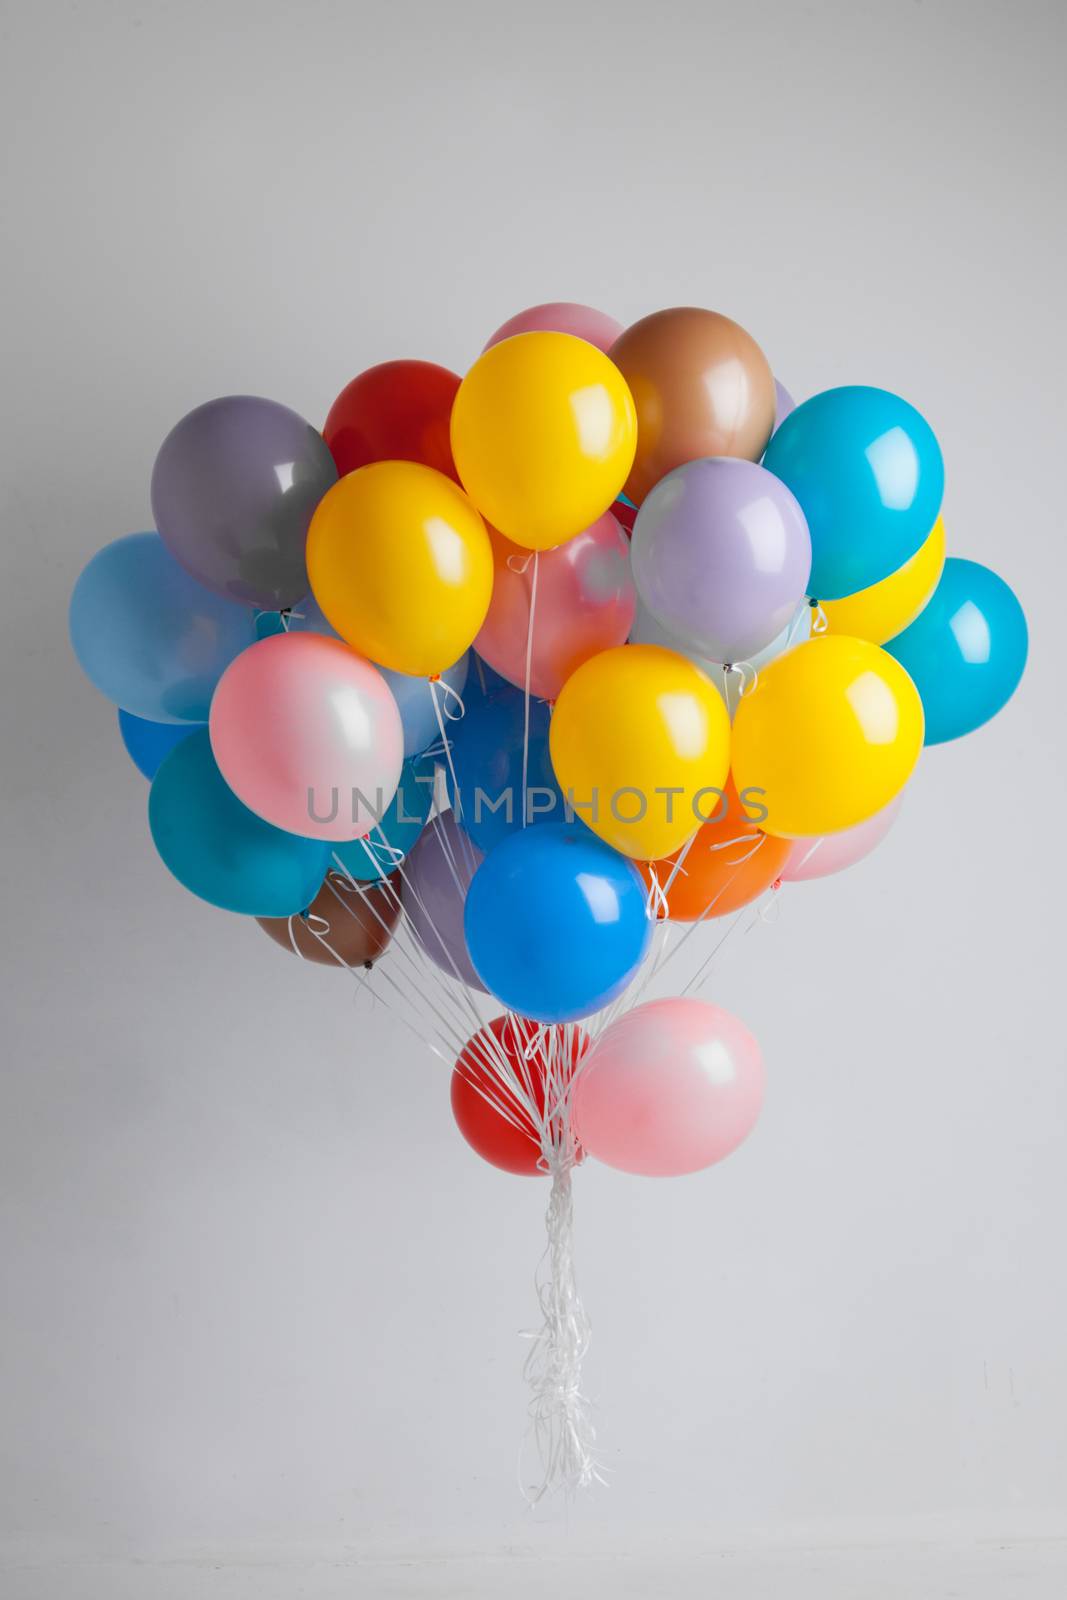 Bunch of many colorful balloons birthday party gift concept